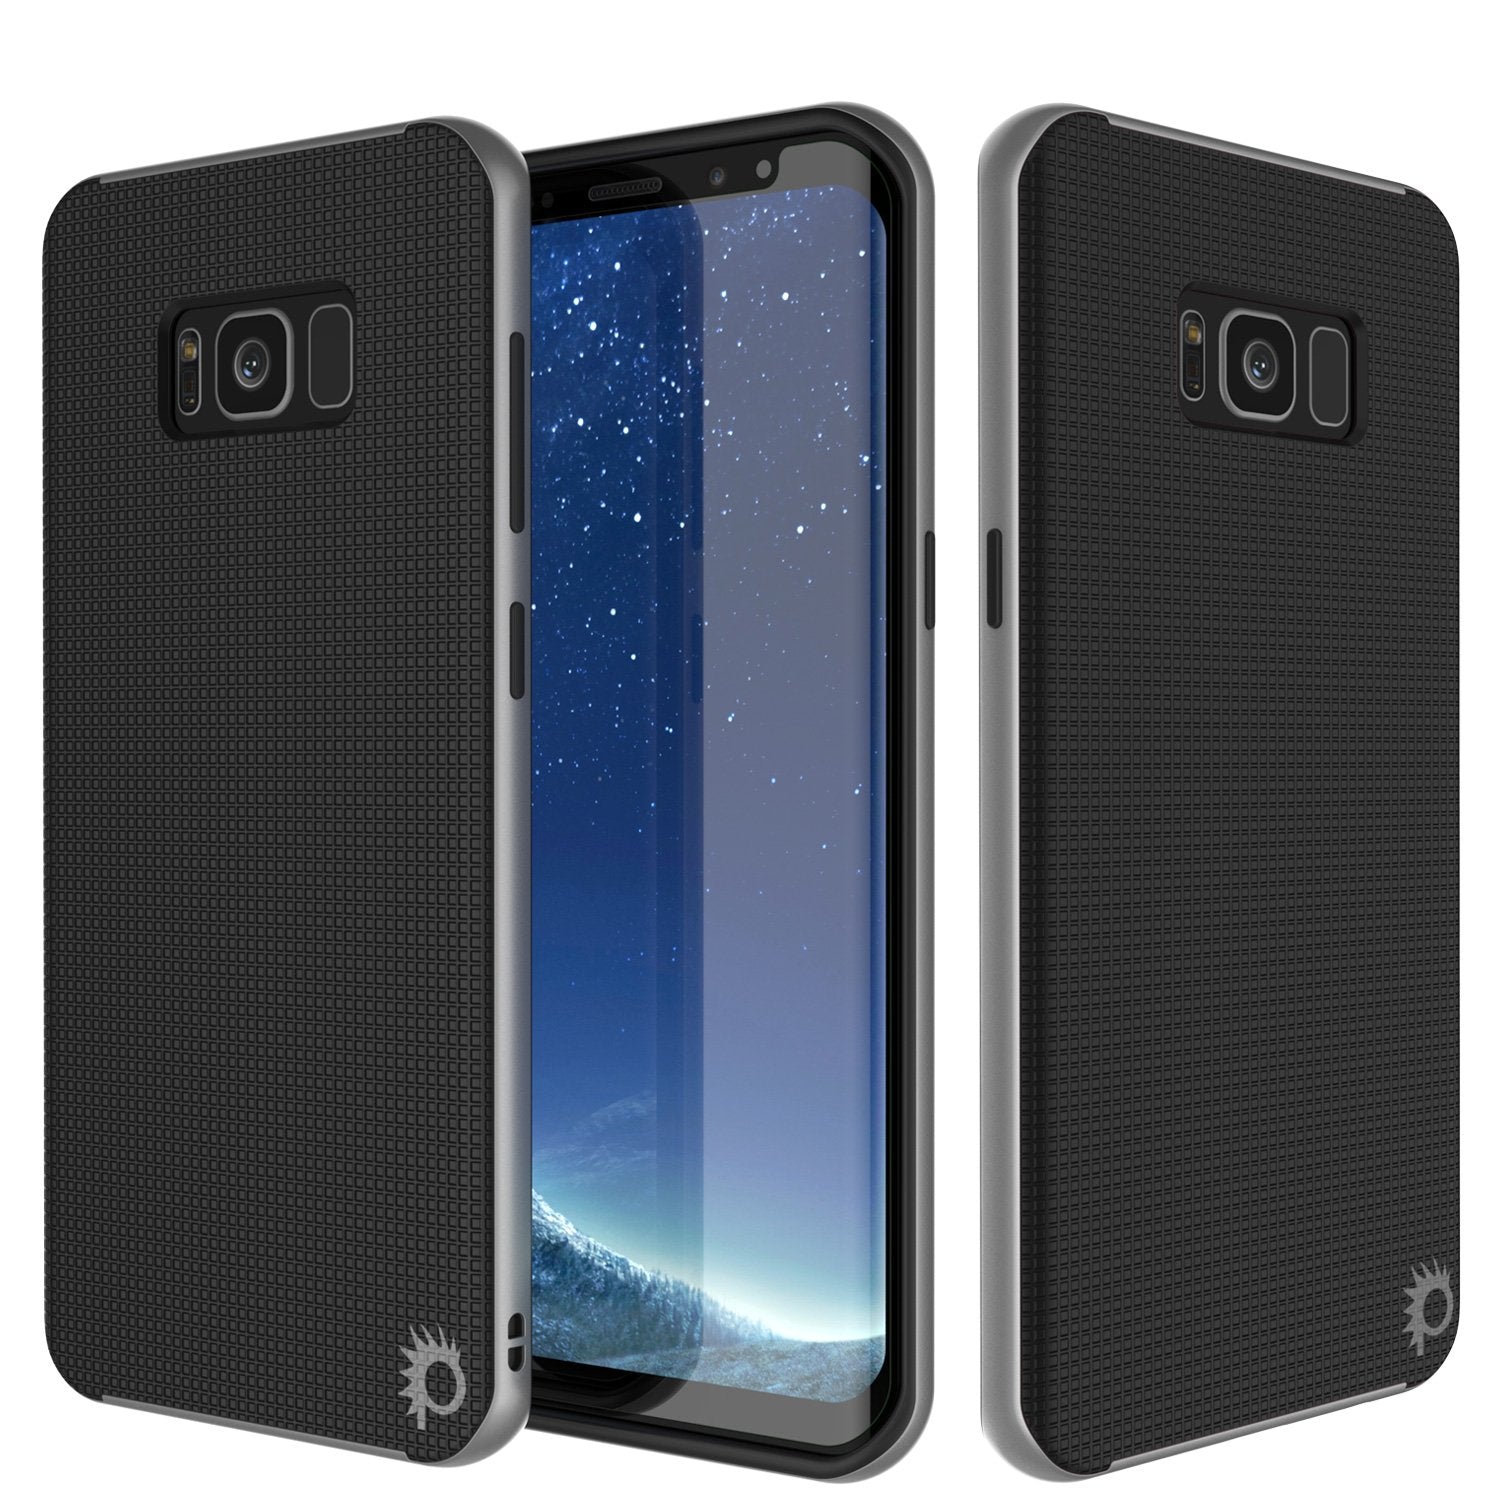 Galaxy S8 PLUS Case, PunkCase [Stealth Series] Hybrid 3-Piece Shockproof Dual Layer Cover [Non-Slip] [Soft TPU + PC Bumper] with PUNKSHIELD Screen Protector for Samsung S8+ [Silver] (Color in image: Silver)